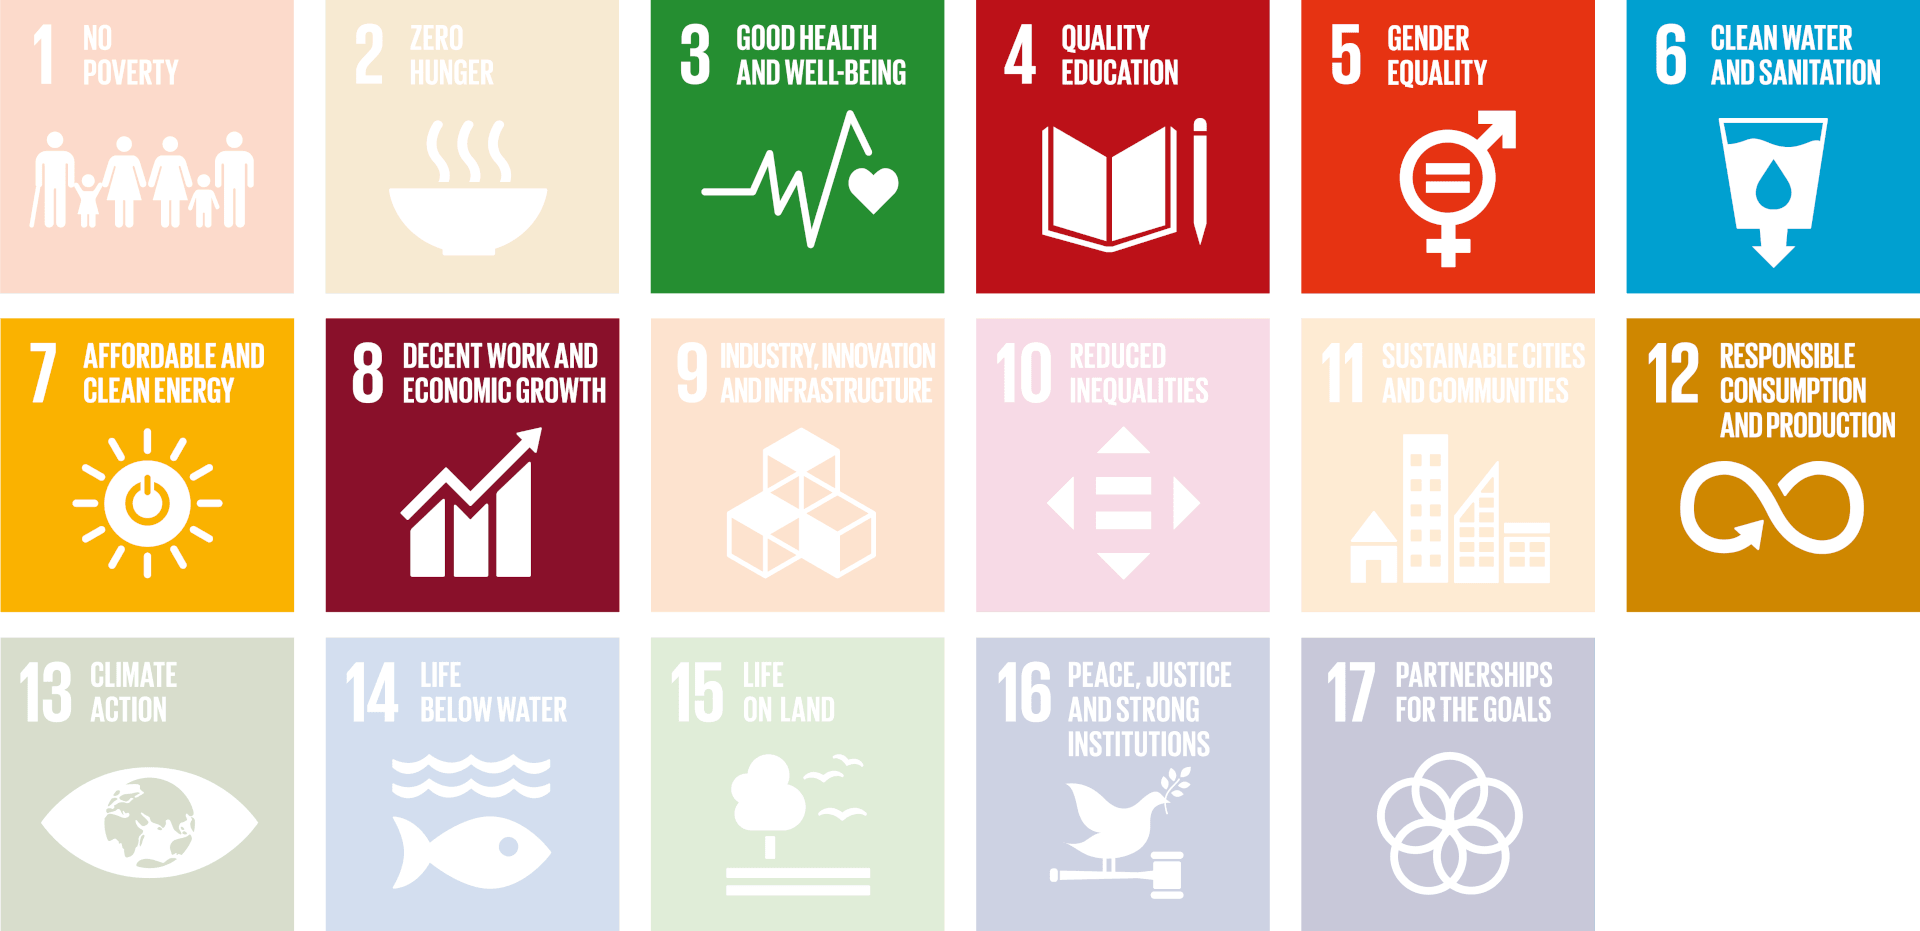 SDG_overview_05.png